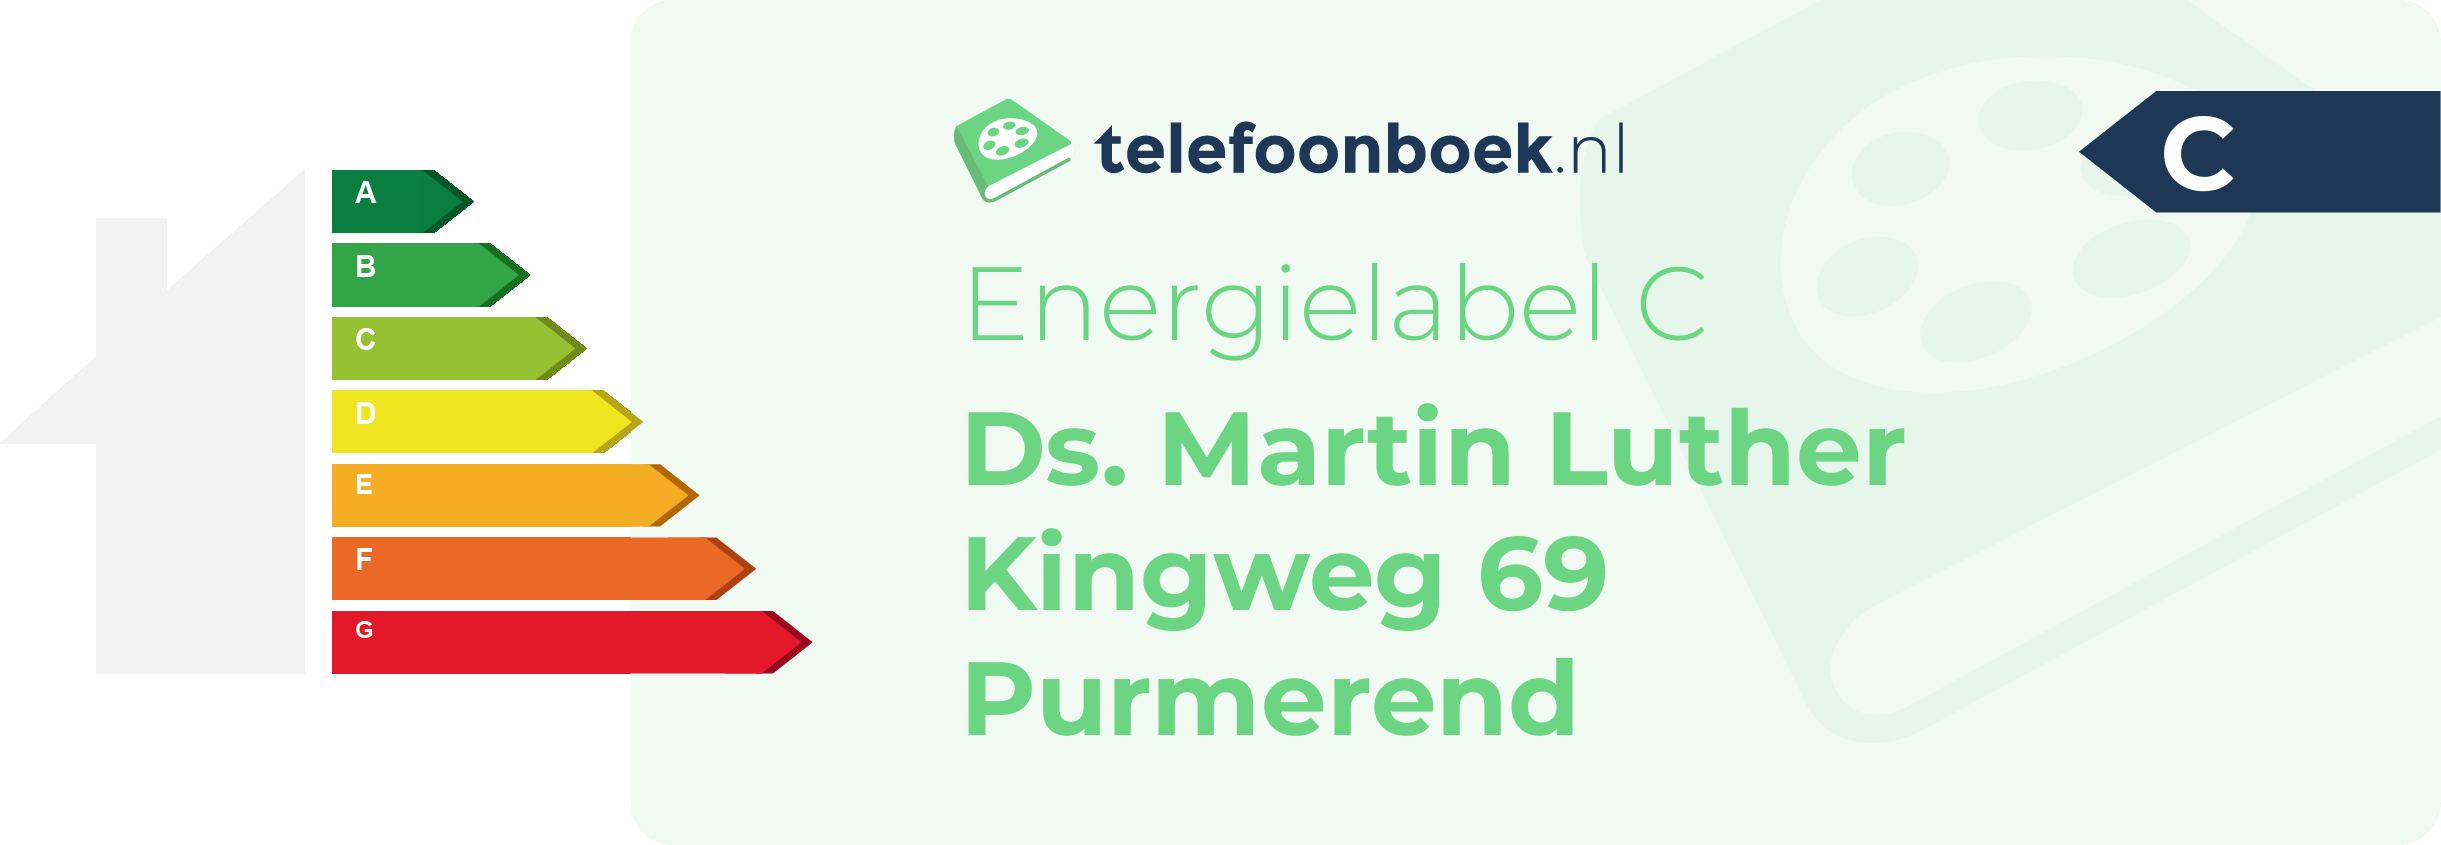 Energielabel Ds. Martin Luther Kingweg 69 Purmerend